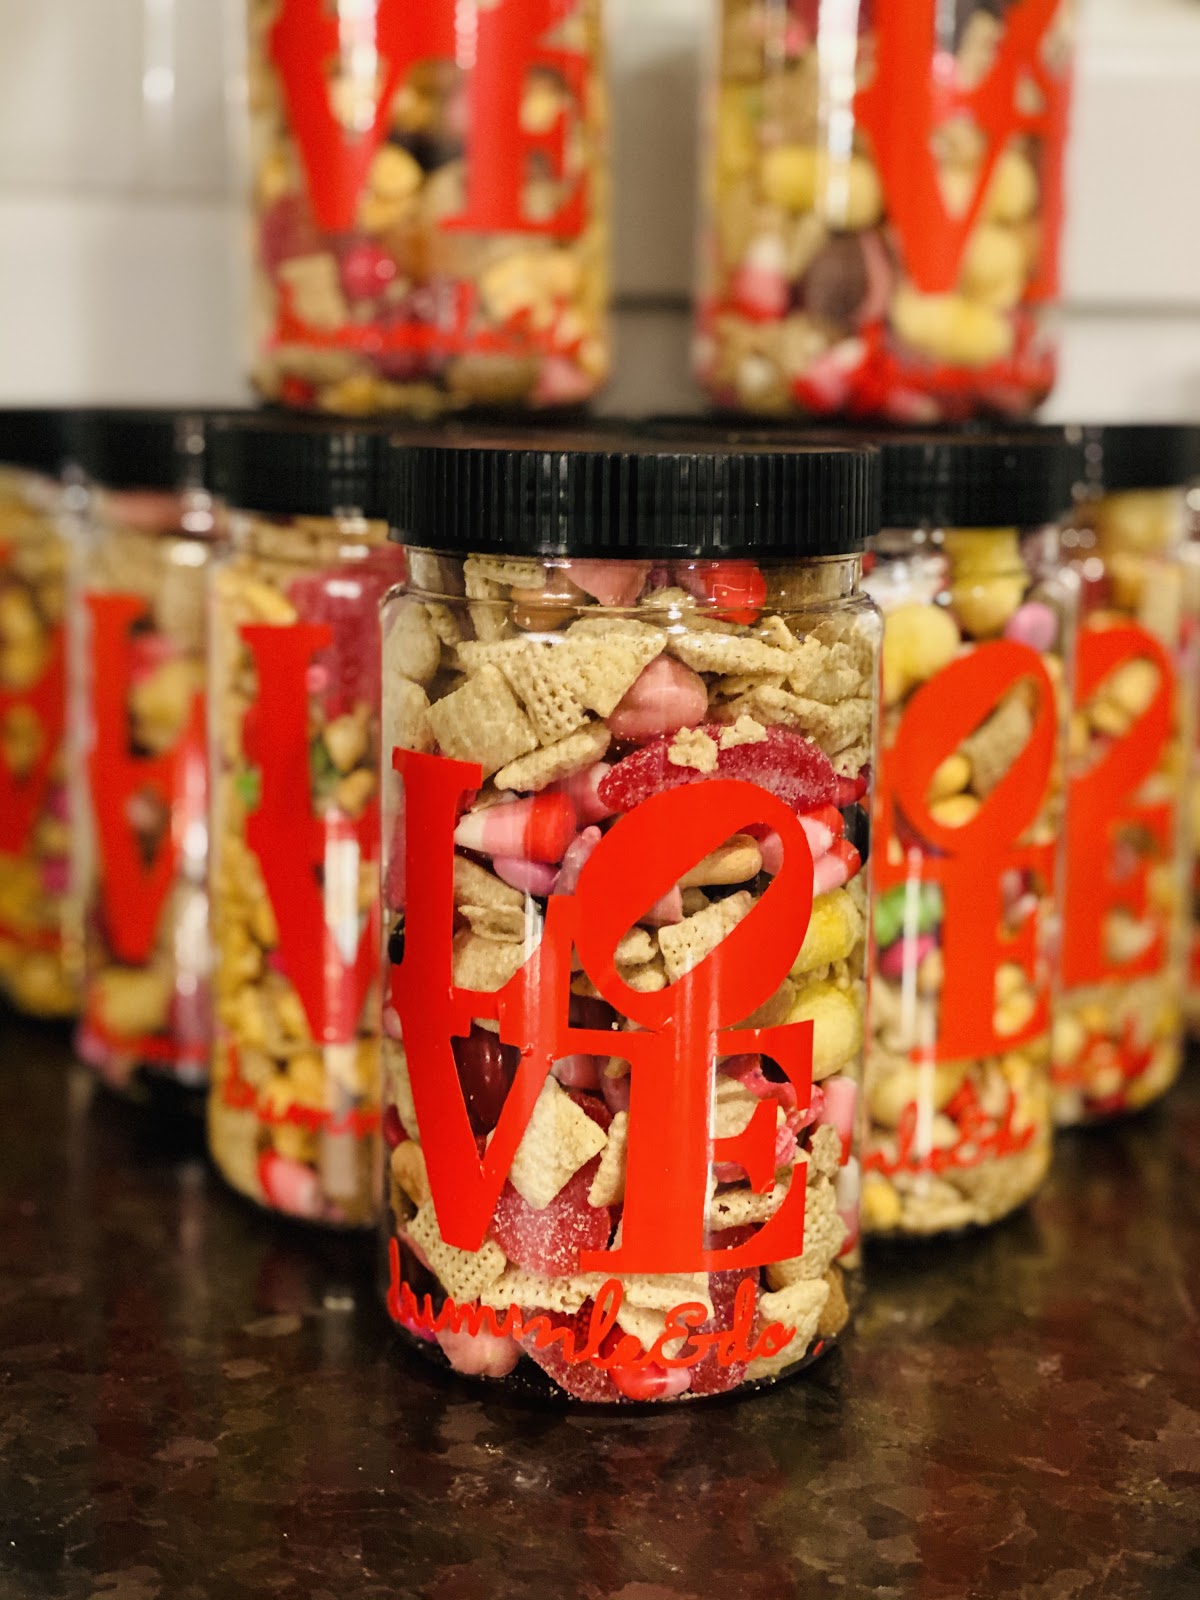 on-launching-a-made-to-order-snack-mixes-with-300-sold-jars-in-one-month